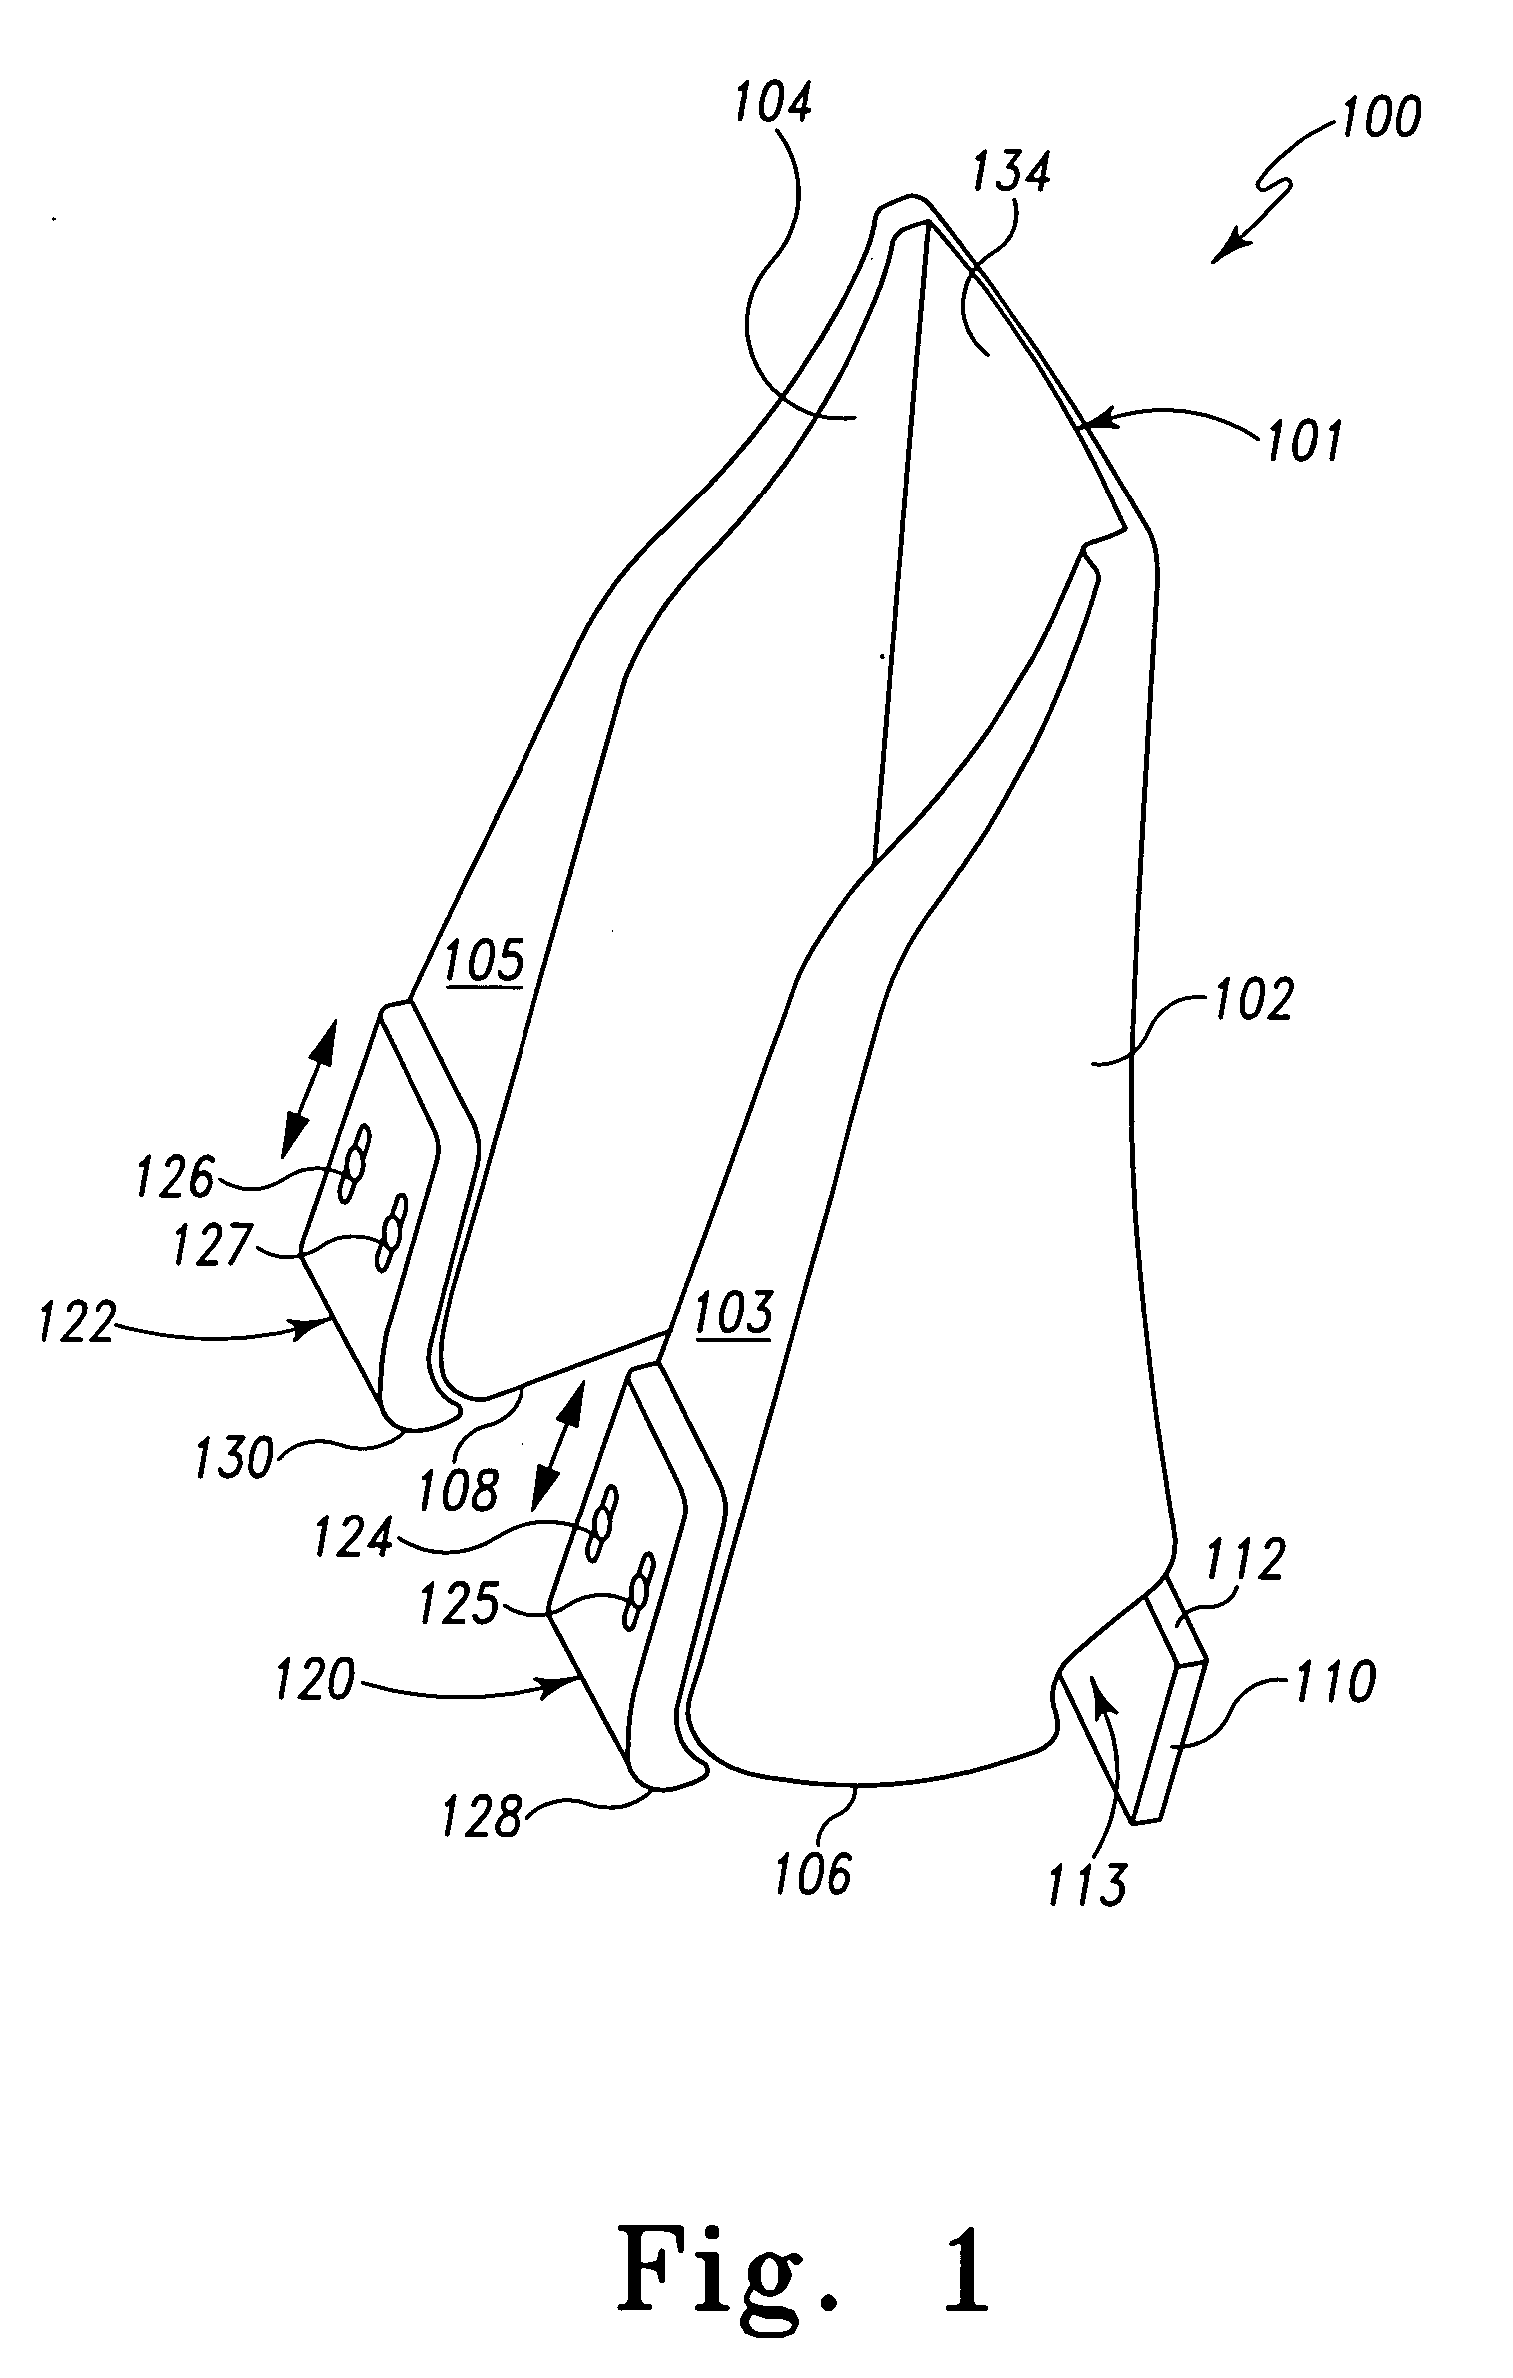 Head and neck restraint system and device